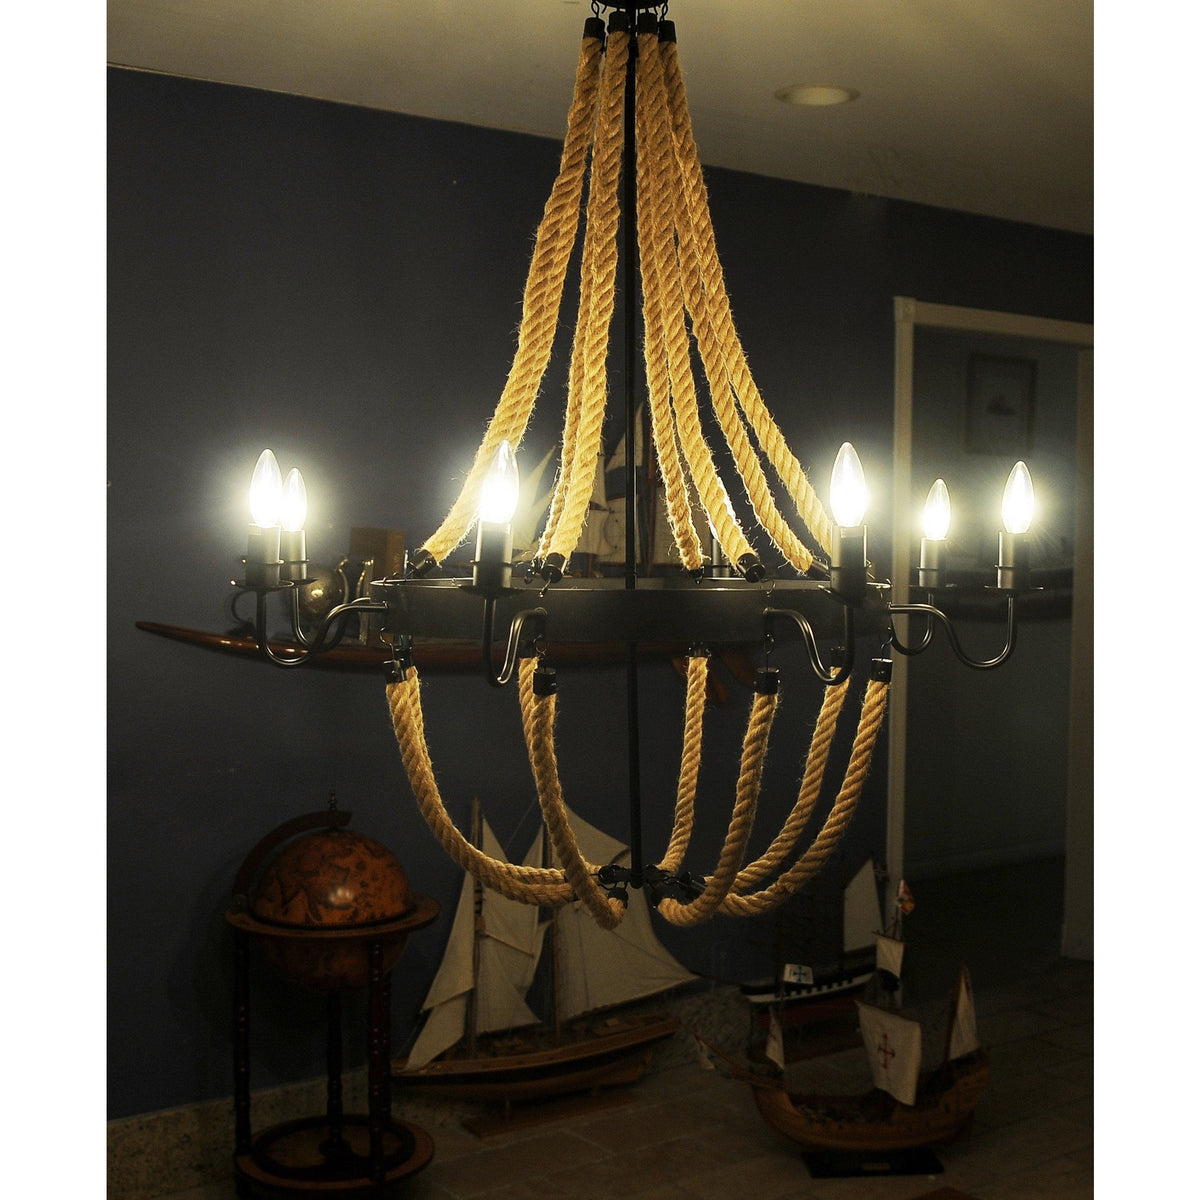 Rustic Iron Metal and Rope Chandelier,chandelier,Adley & Company Inc.